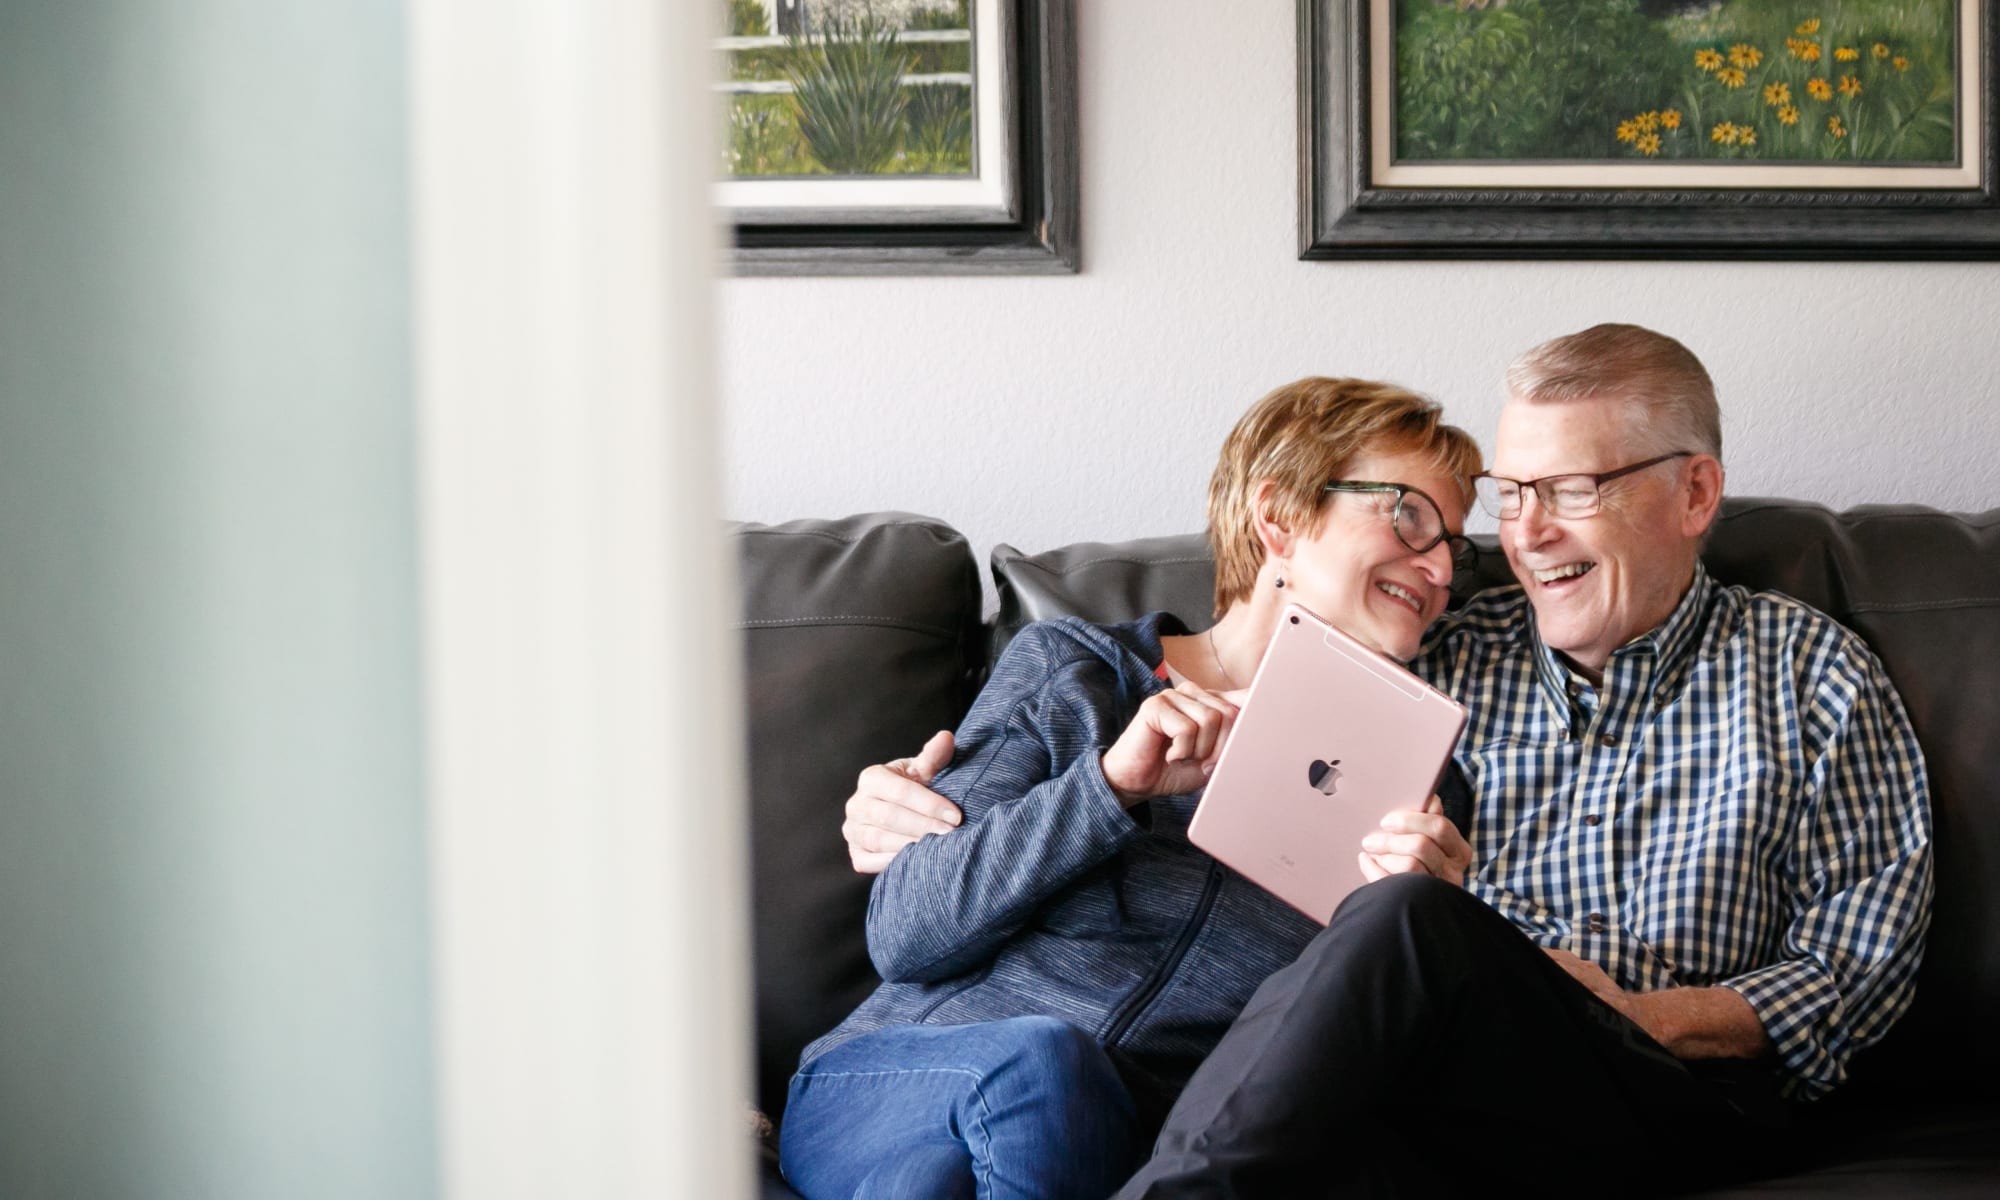 A couple looking at an iPad together at Touchmark at Mount Bachelor Village in Bend, Oregon